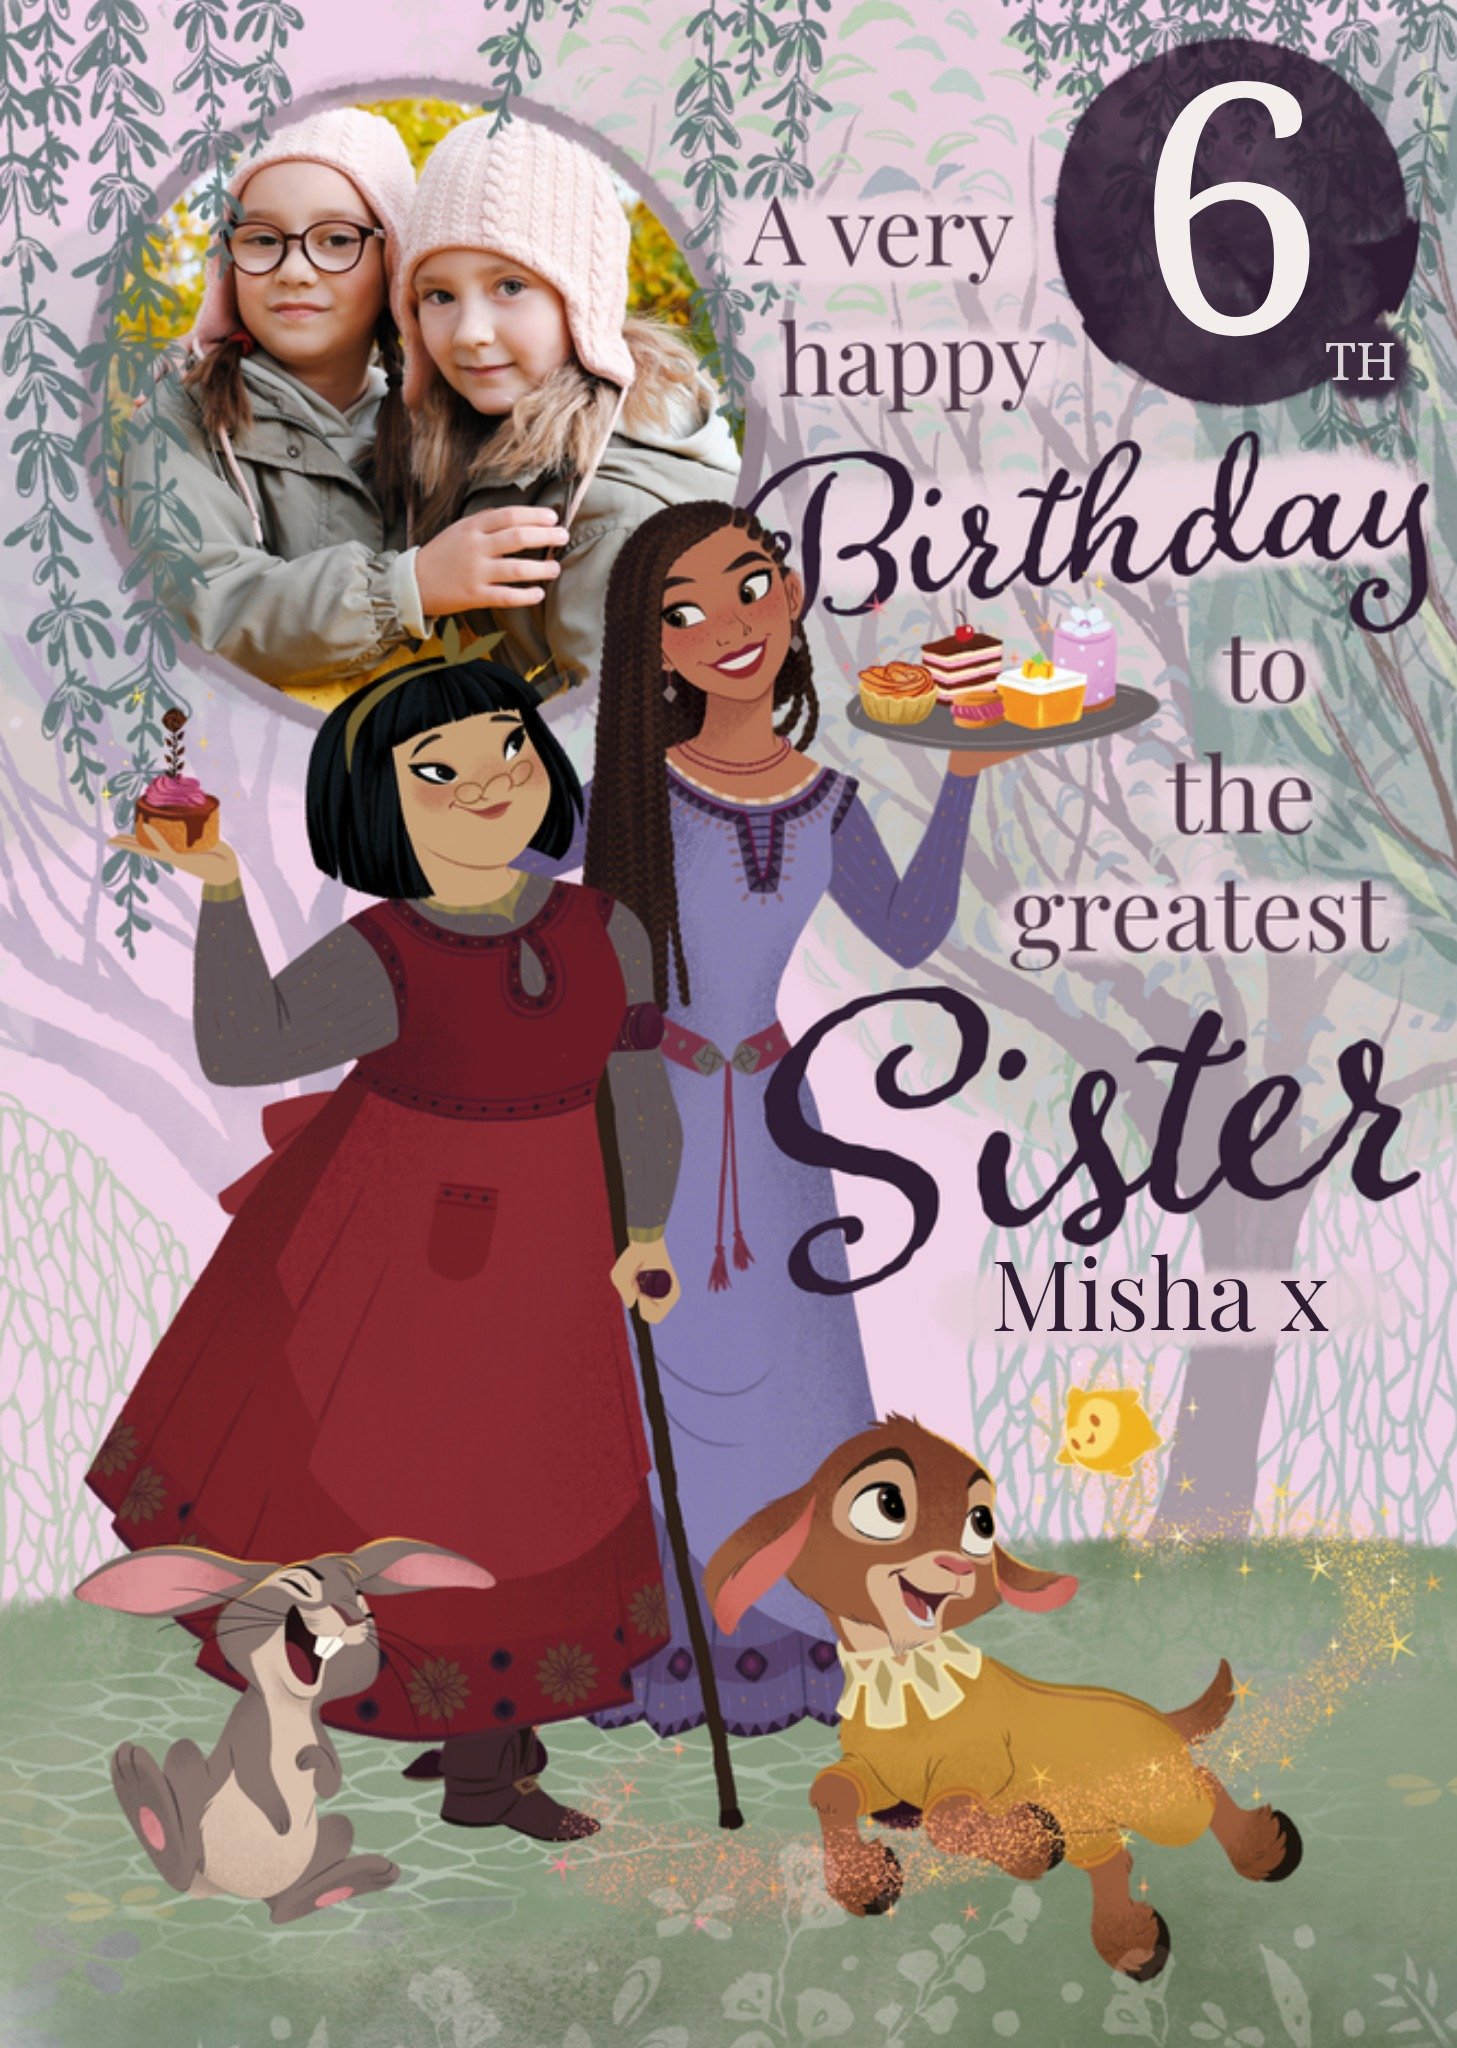 Disney Wish To The Greatest Sister Photo Upload Birthday Card, Large